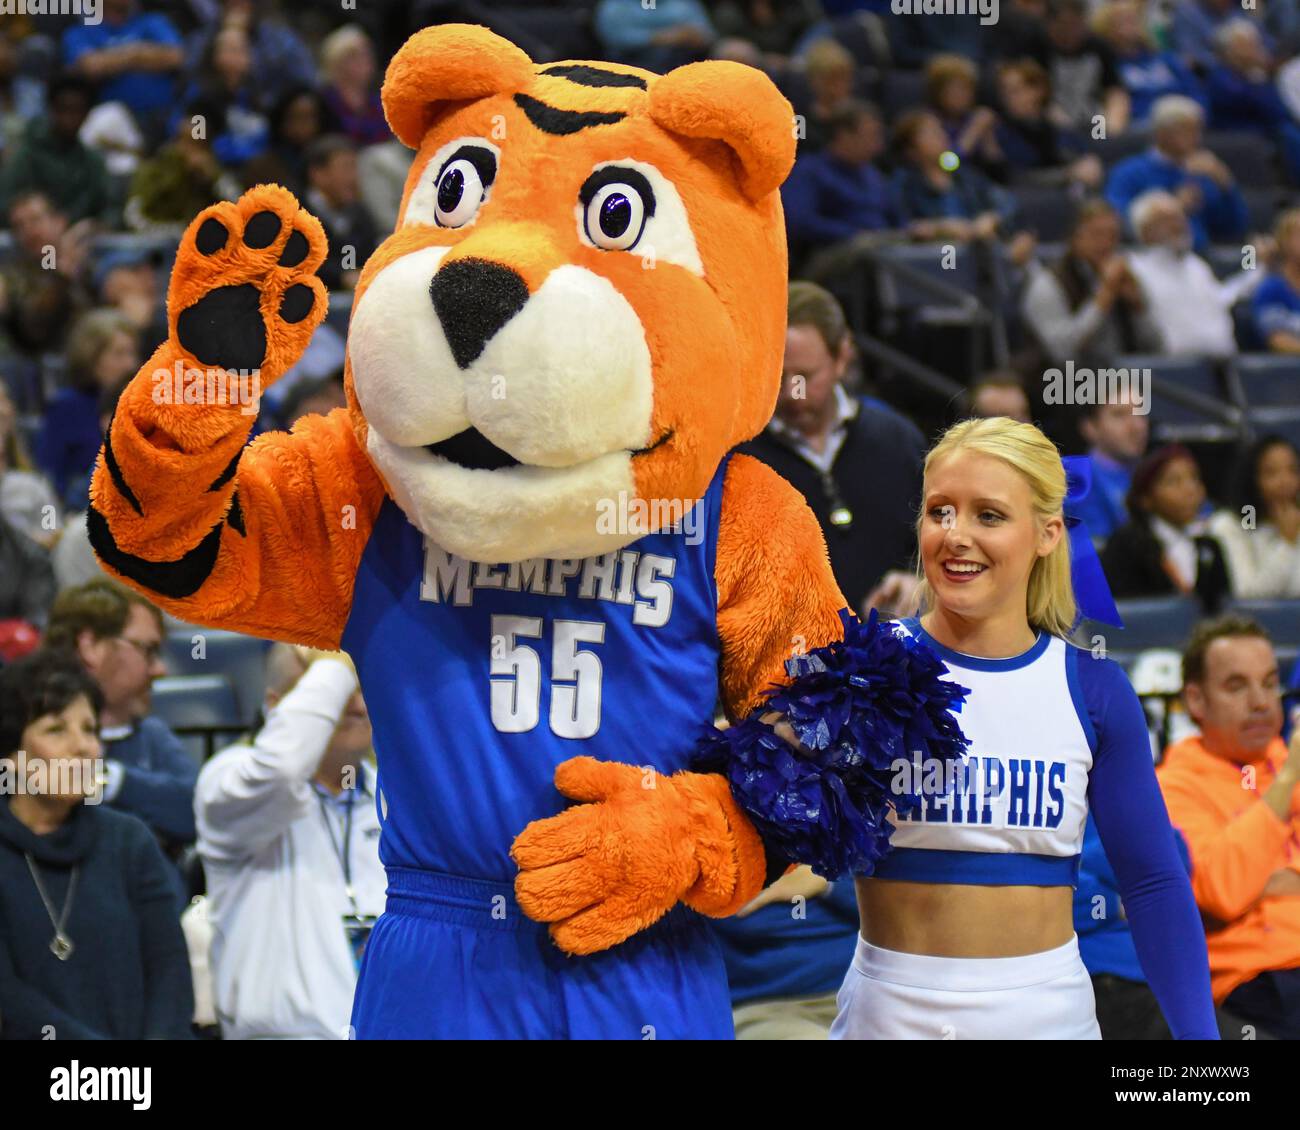 December 12, 2017; Memphis, TN, USA; The Memphis Tigers mascot, POUNCER,  and a Tigers cheerleader performing during an NCAA D1 basketball game. The  Memphis Tigers defeated the Albany Great Danes, 67-58, at